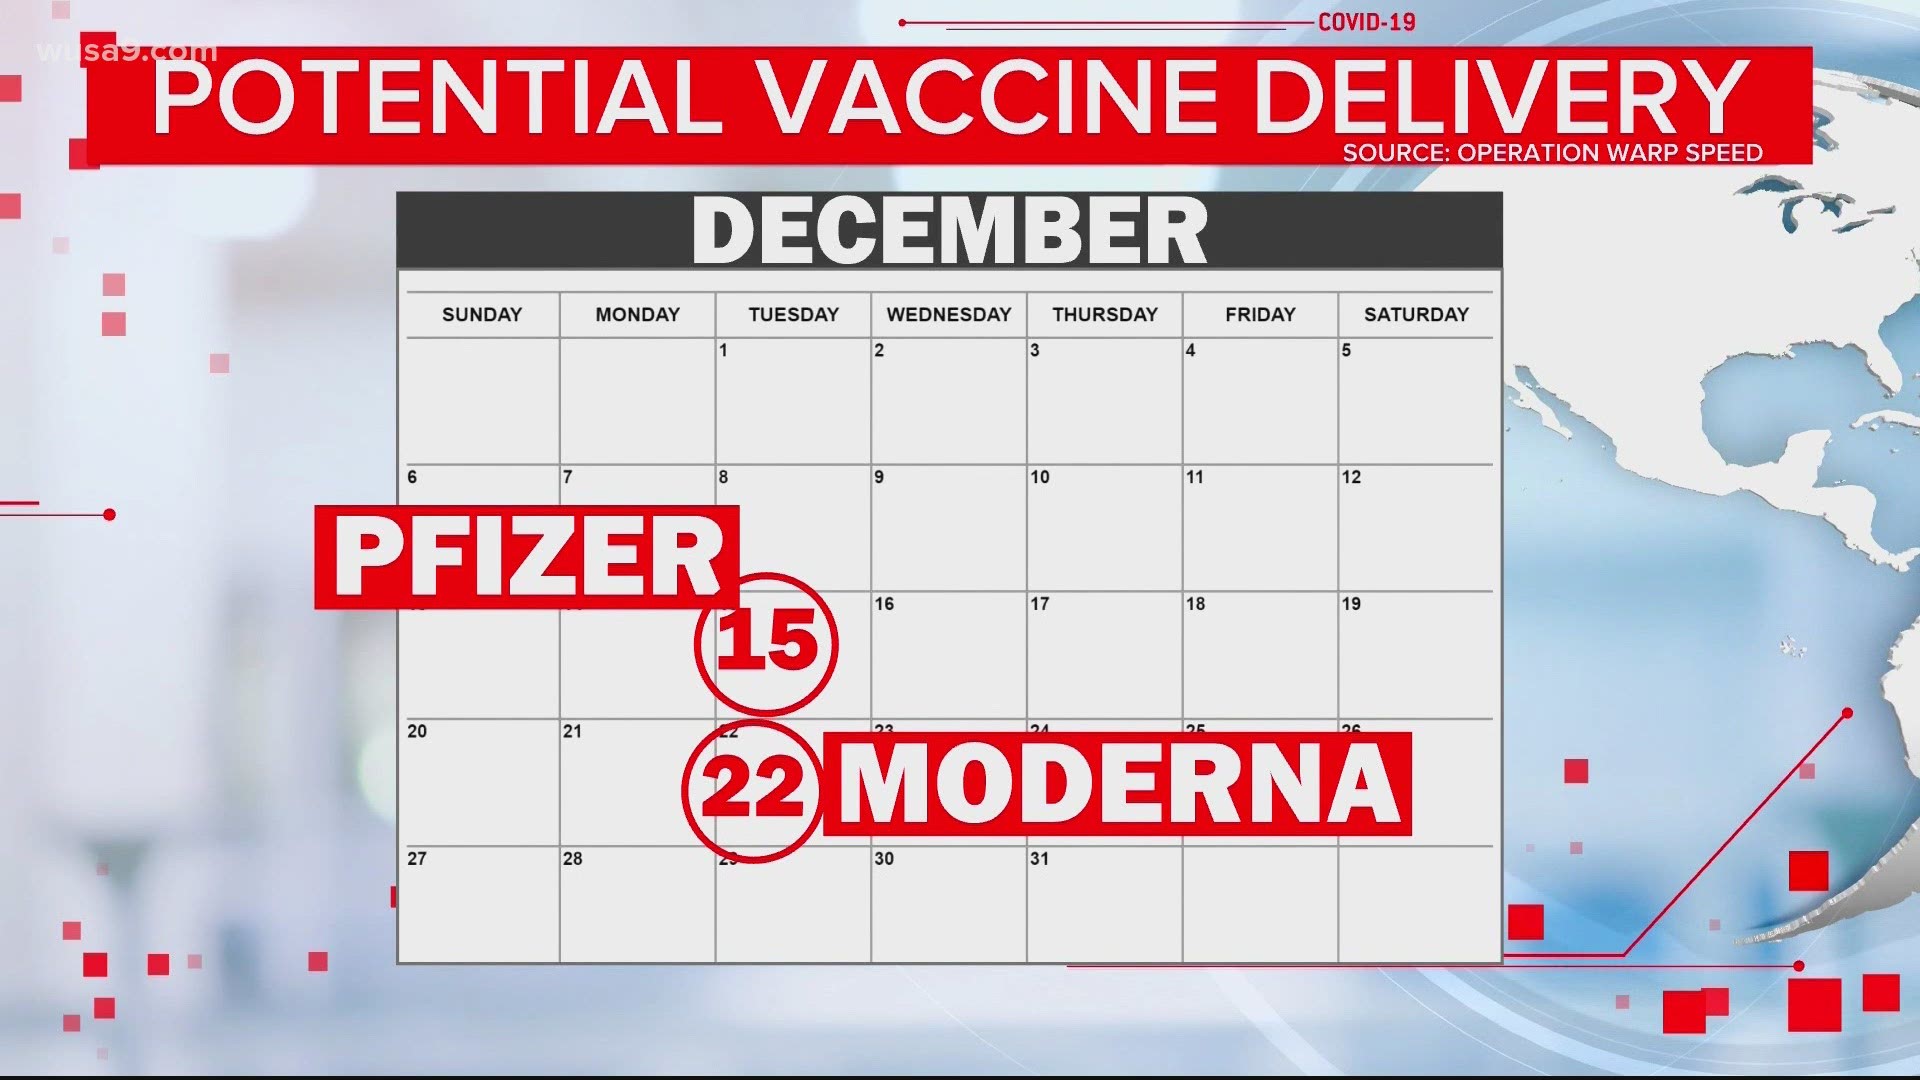 Federal documents obtained by CBS News point to December 15th for states to start receiving the Pfizer vaccine.